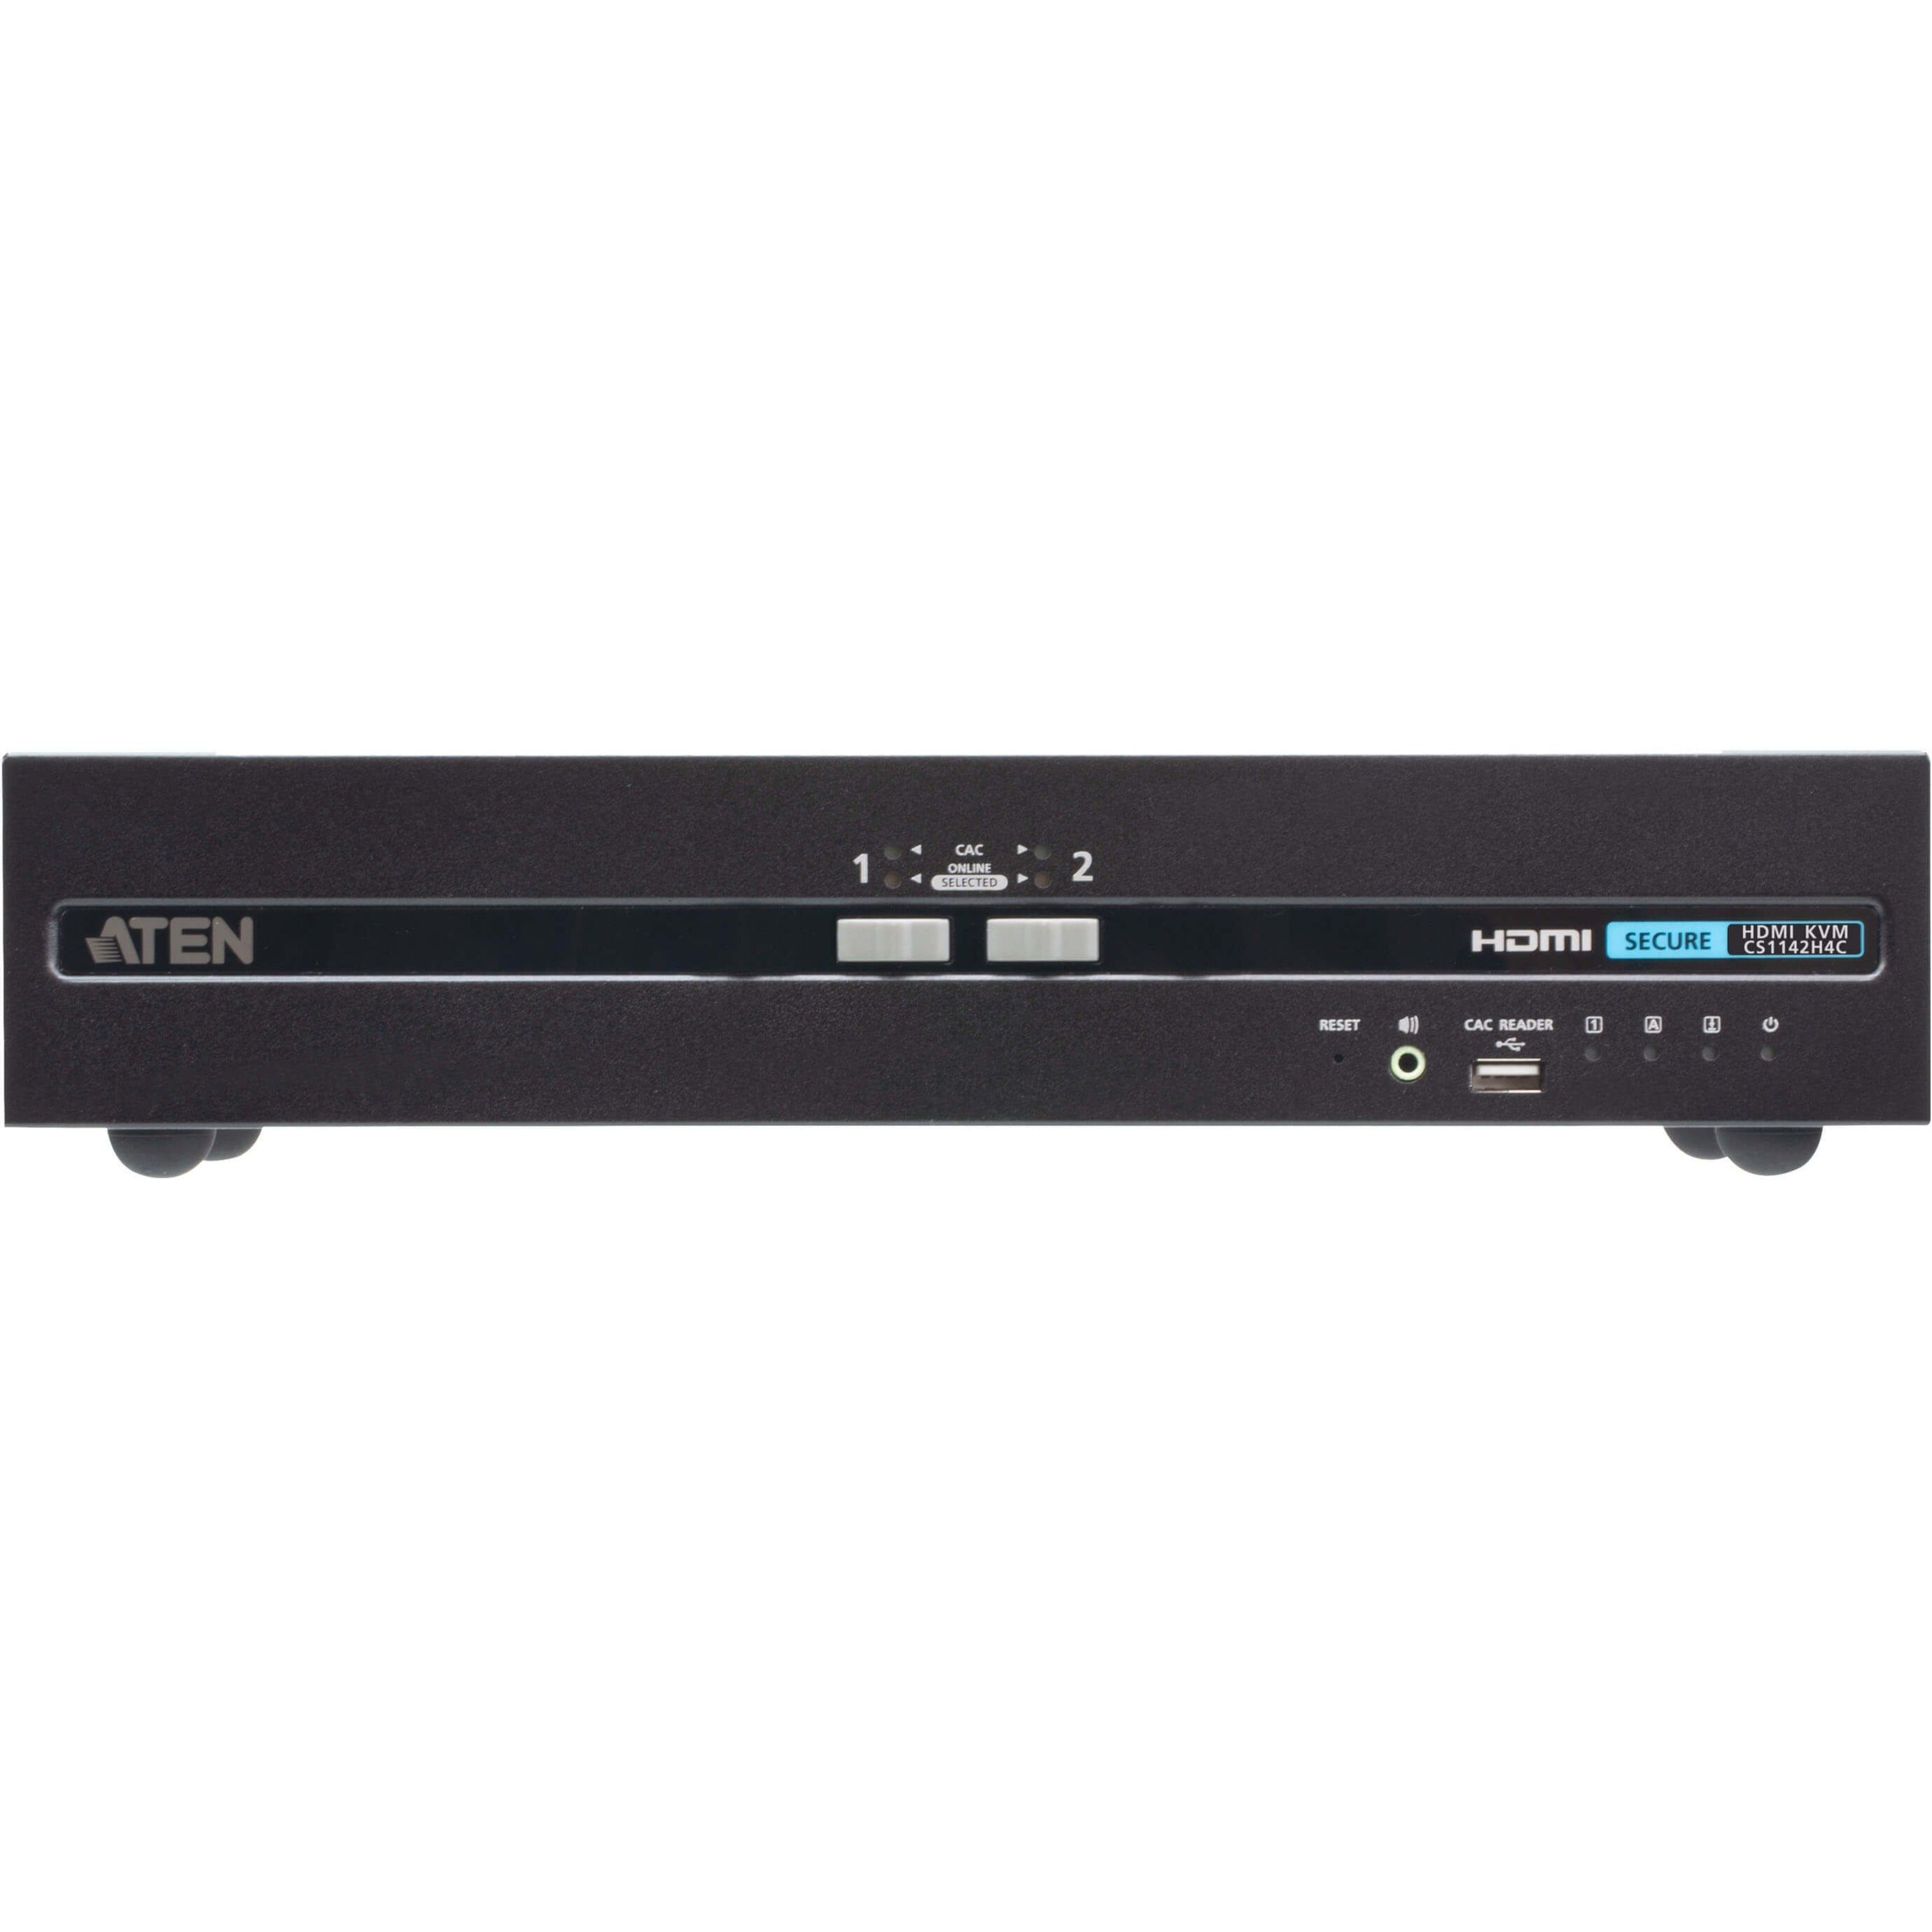 ATEN CS1142H4C 2-Port USB HDMI Dual Display Secure KVM Switch with CAC (PSD PP v4.0 Compliant), 3840 x 2160 Resolution, 3 Year Warranty